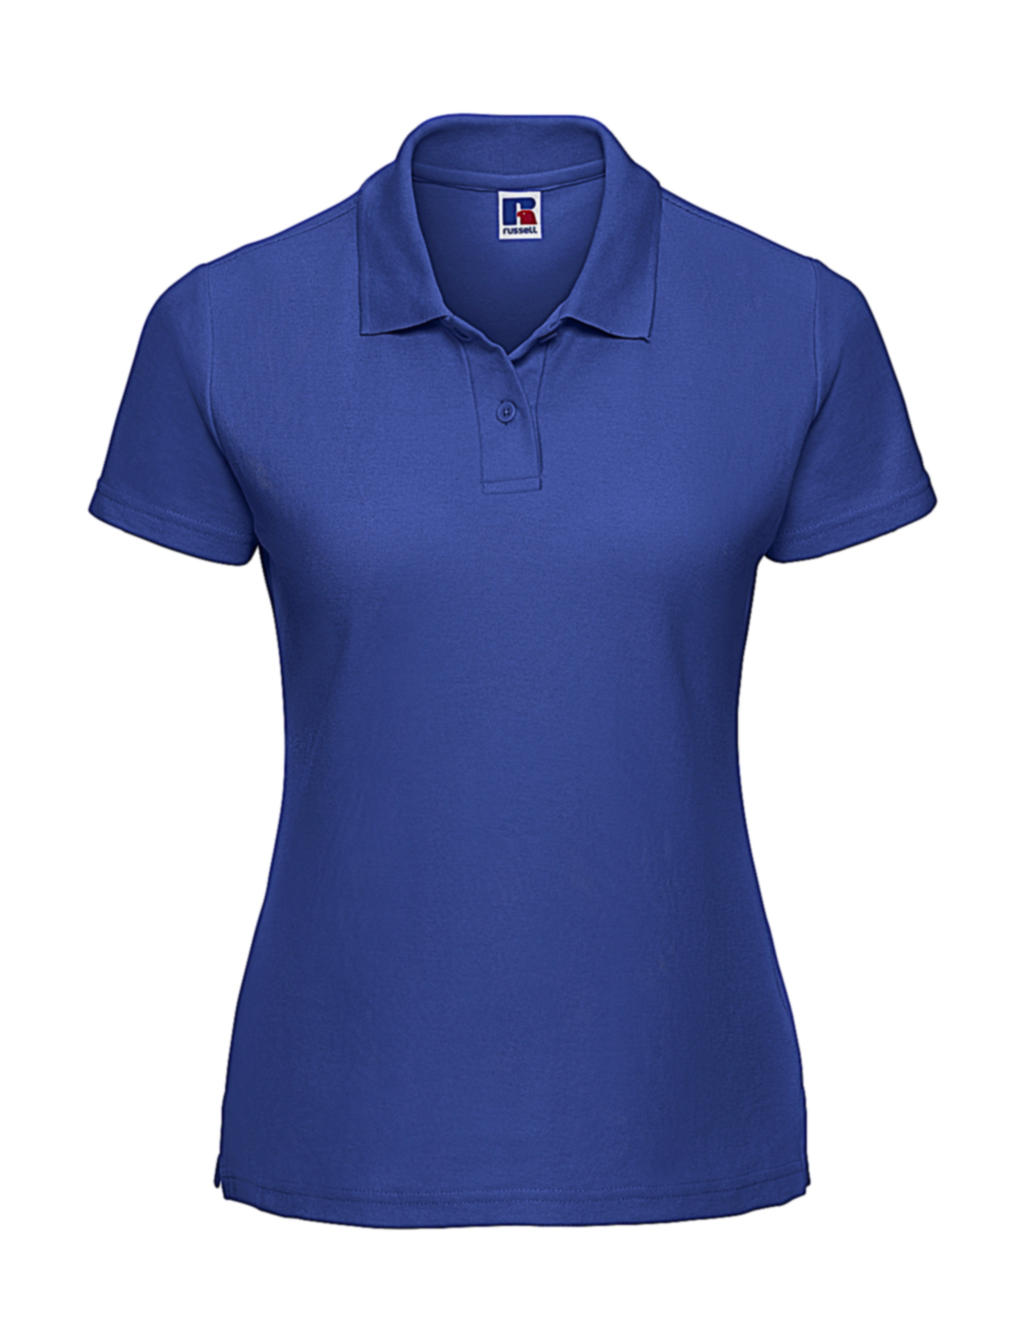  Ladies Classic Polycotton Polo in Farbe Bright Royal